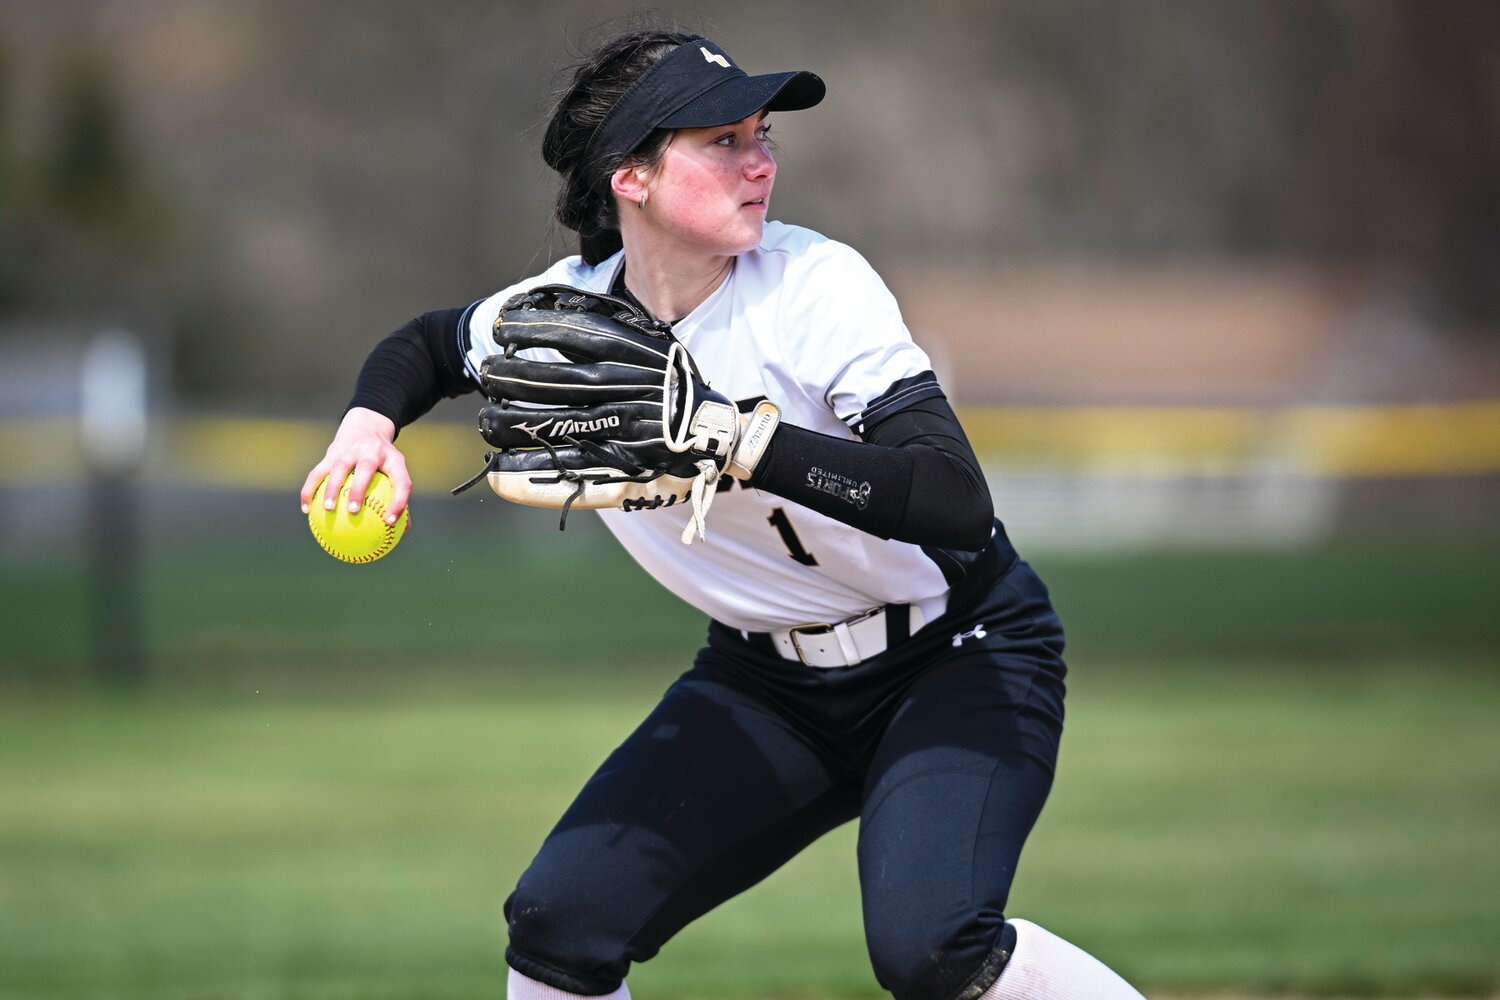 Archbishop Wood shortstop Elise Cawley throws out a runner during the fourth inning.